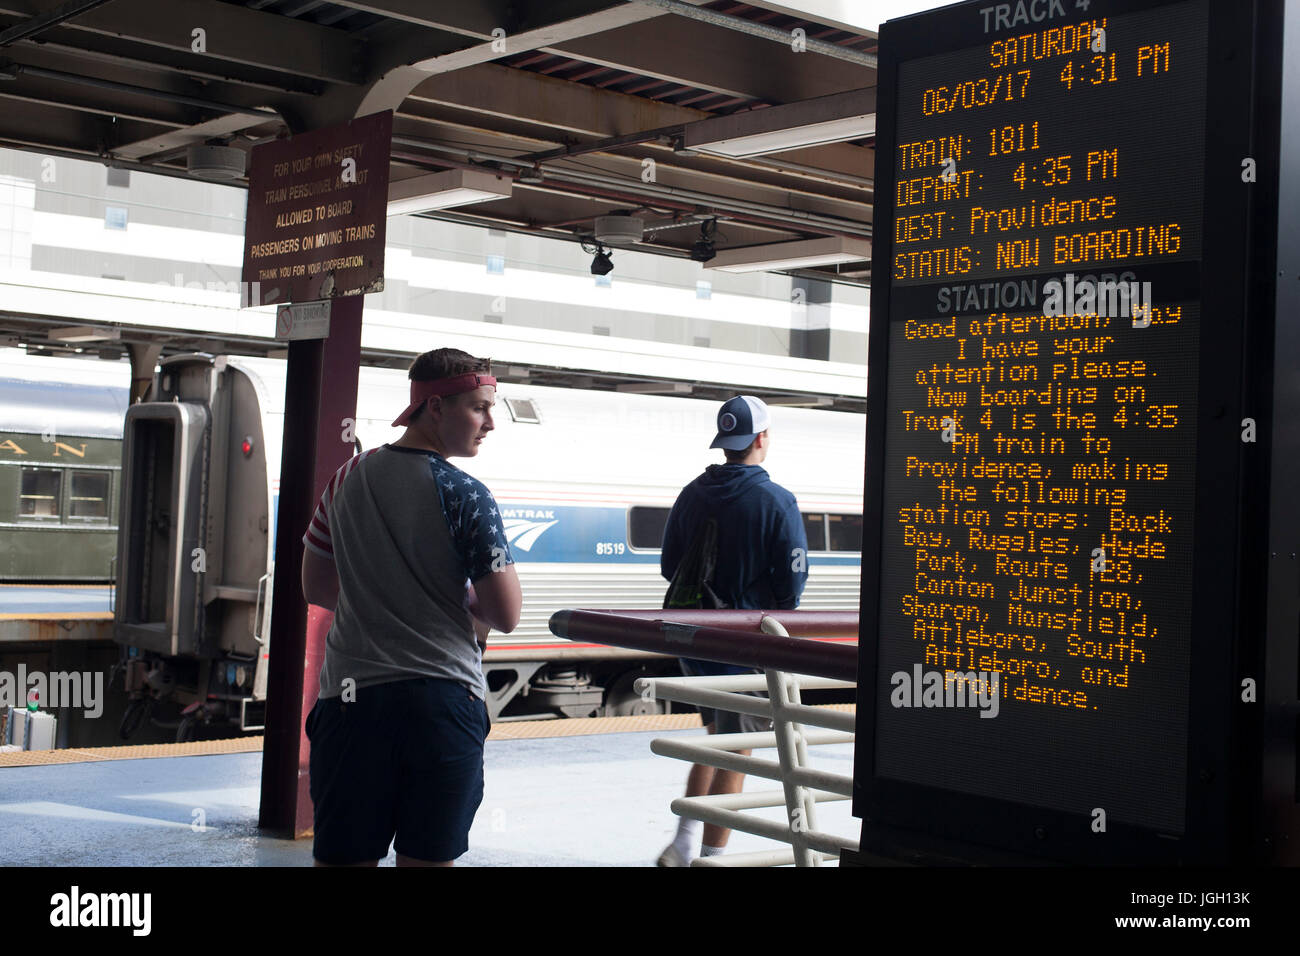 Departure board on track at South Station in Boston, Massachusetts. Stock Photo